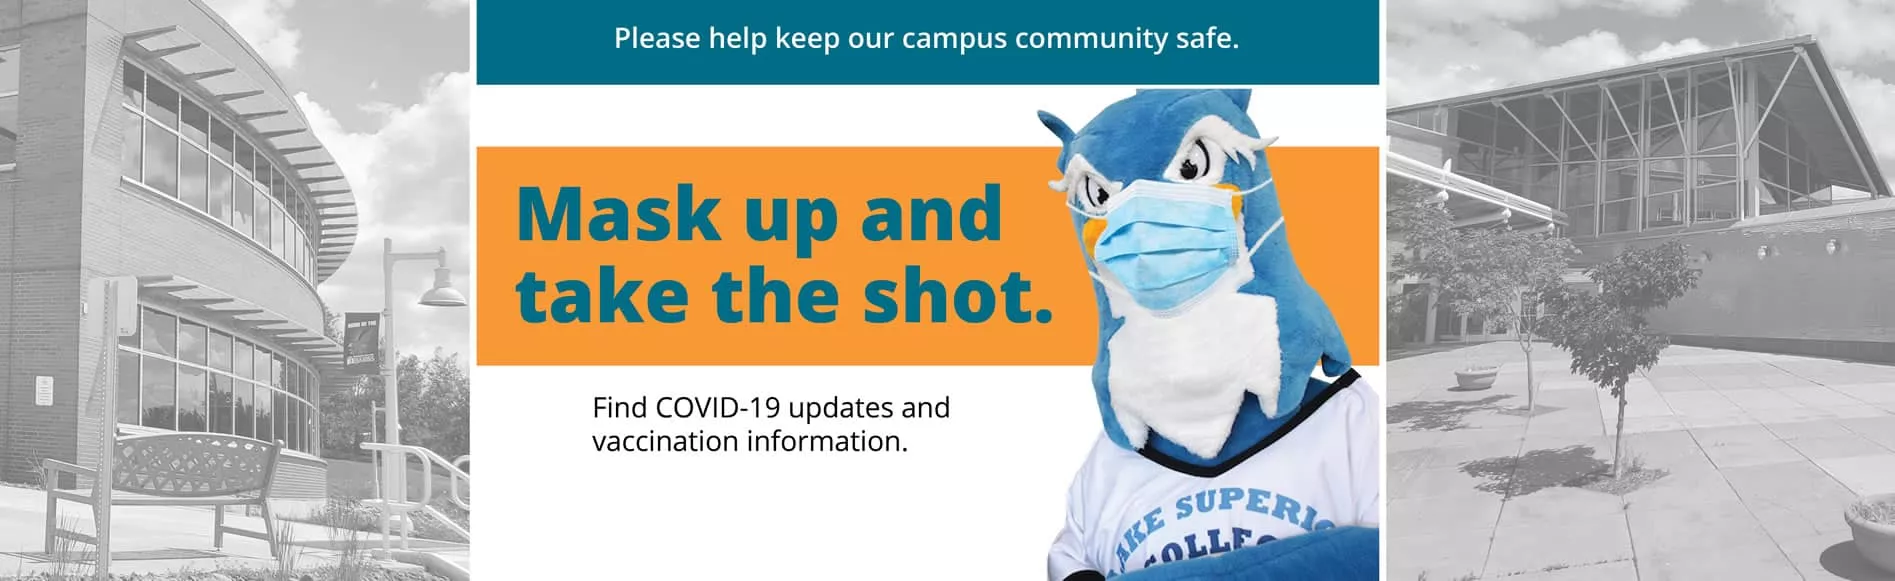 Mask up and take the shot. Find COVID-19 updates and vaccination information.